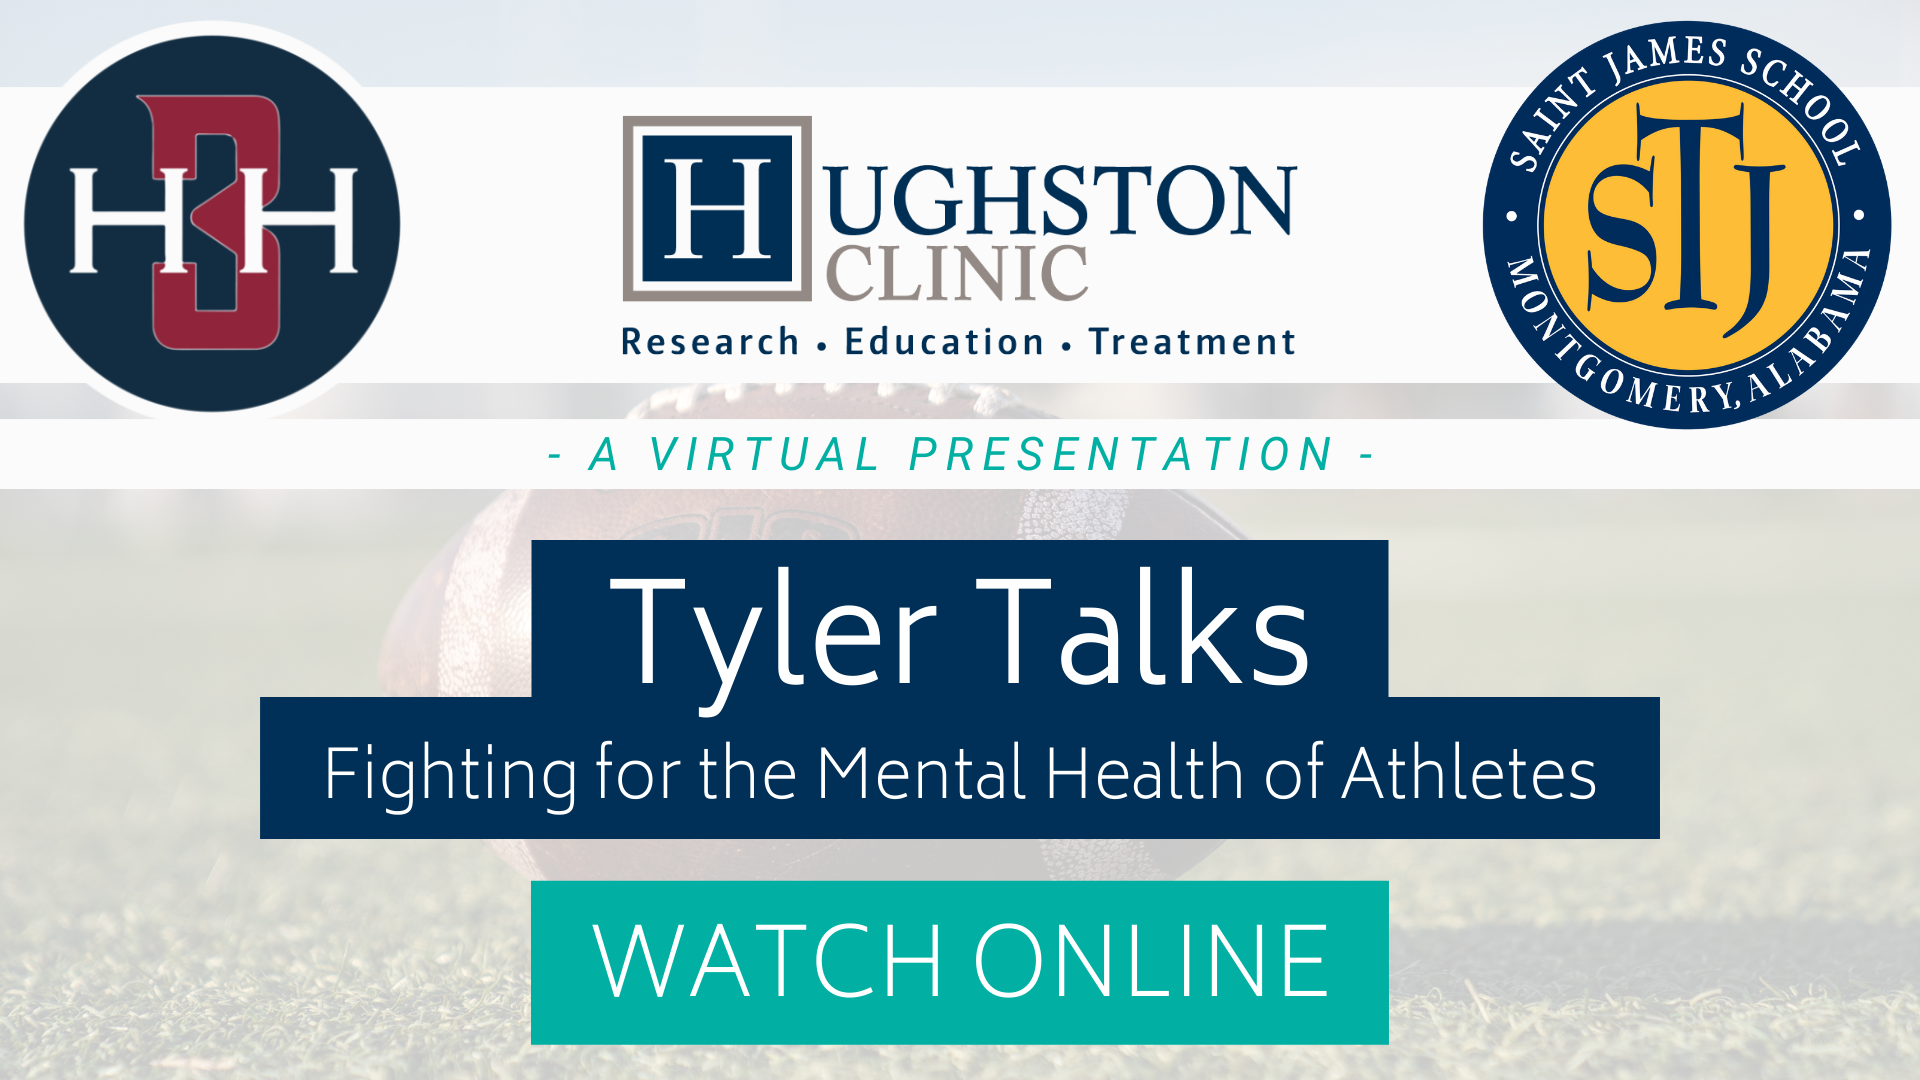 Fighting for the Mental Health of Athletes